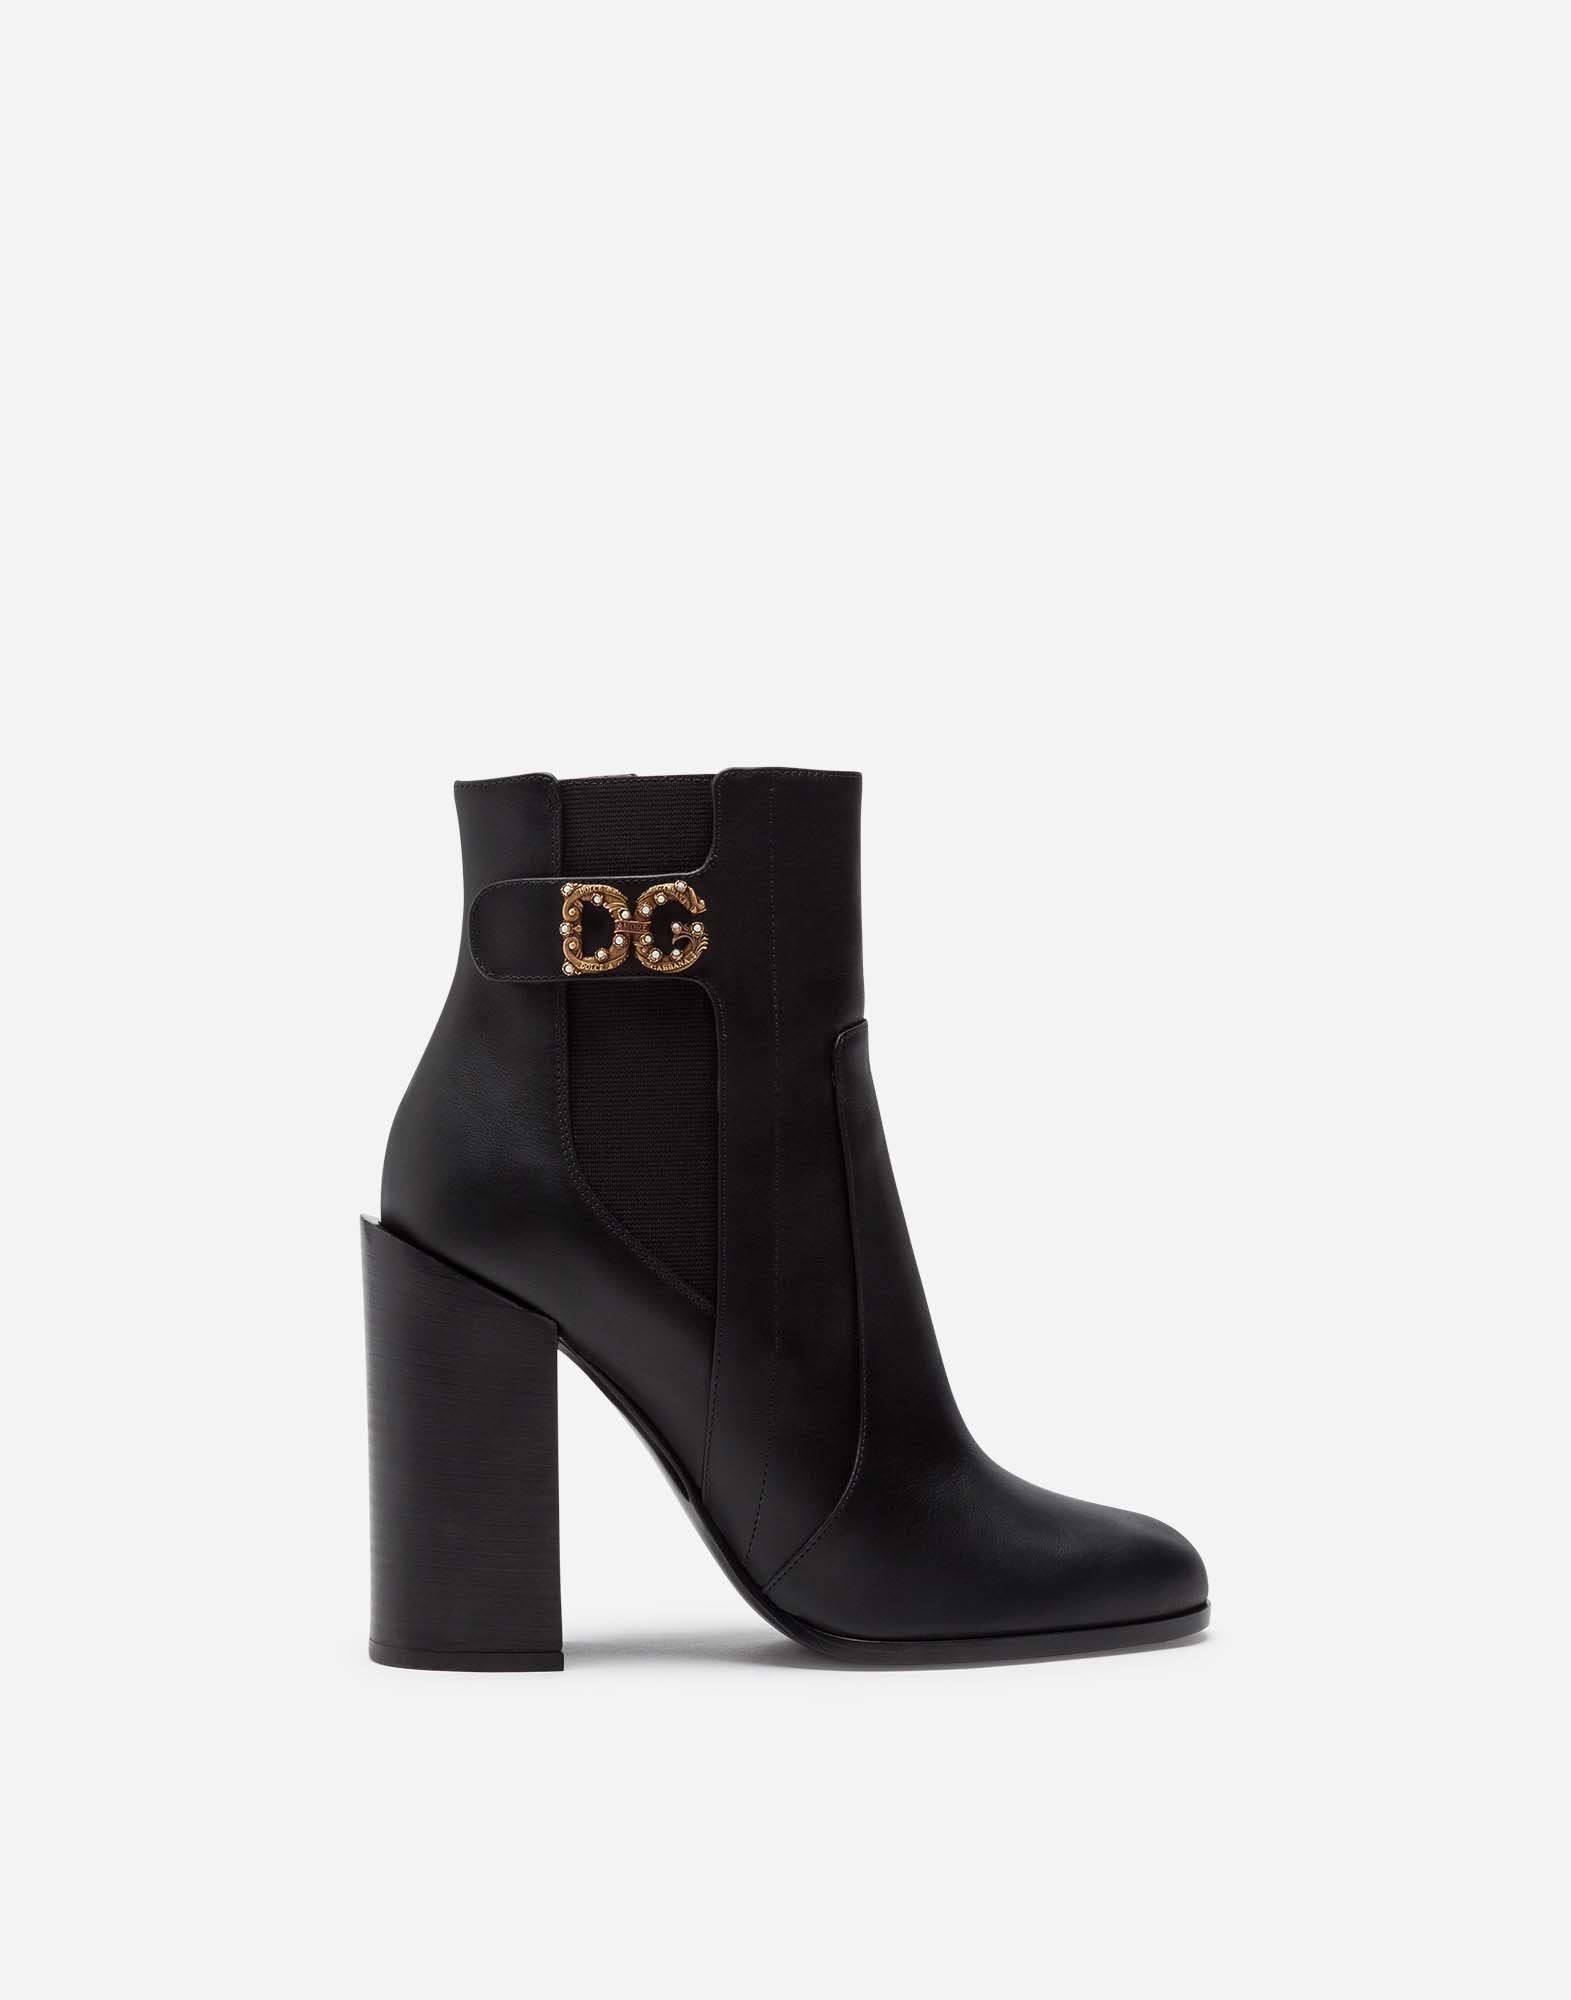 CALFSKIN NAPPA ANKLE BOOTS WITH DG LOGO